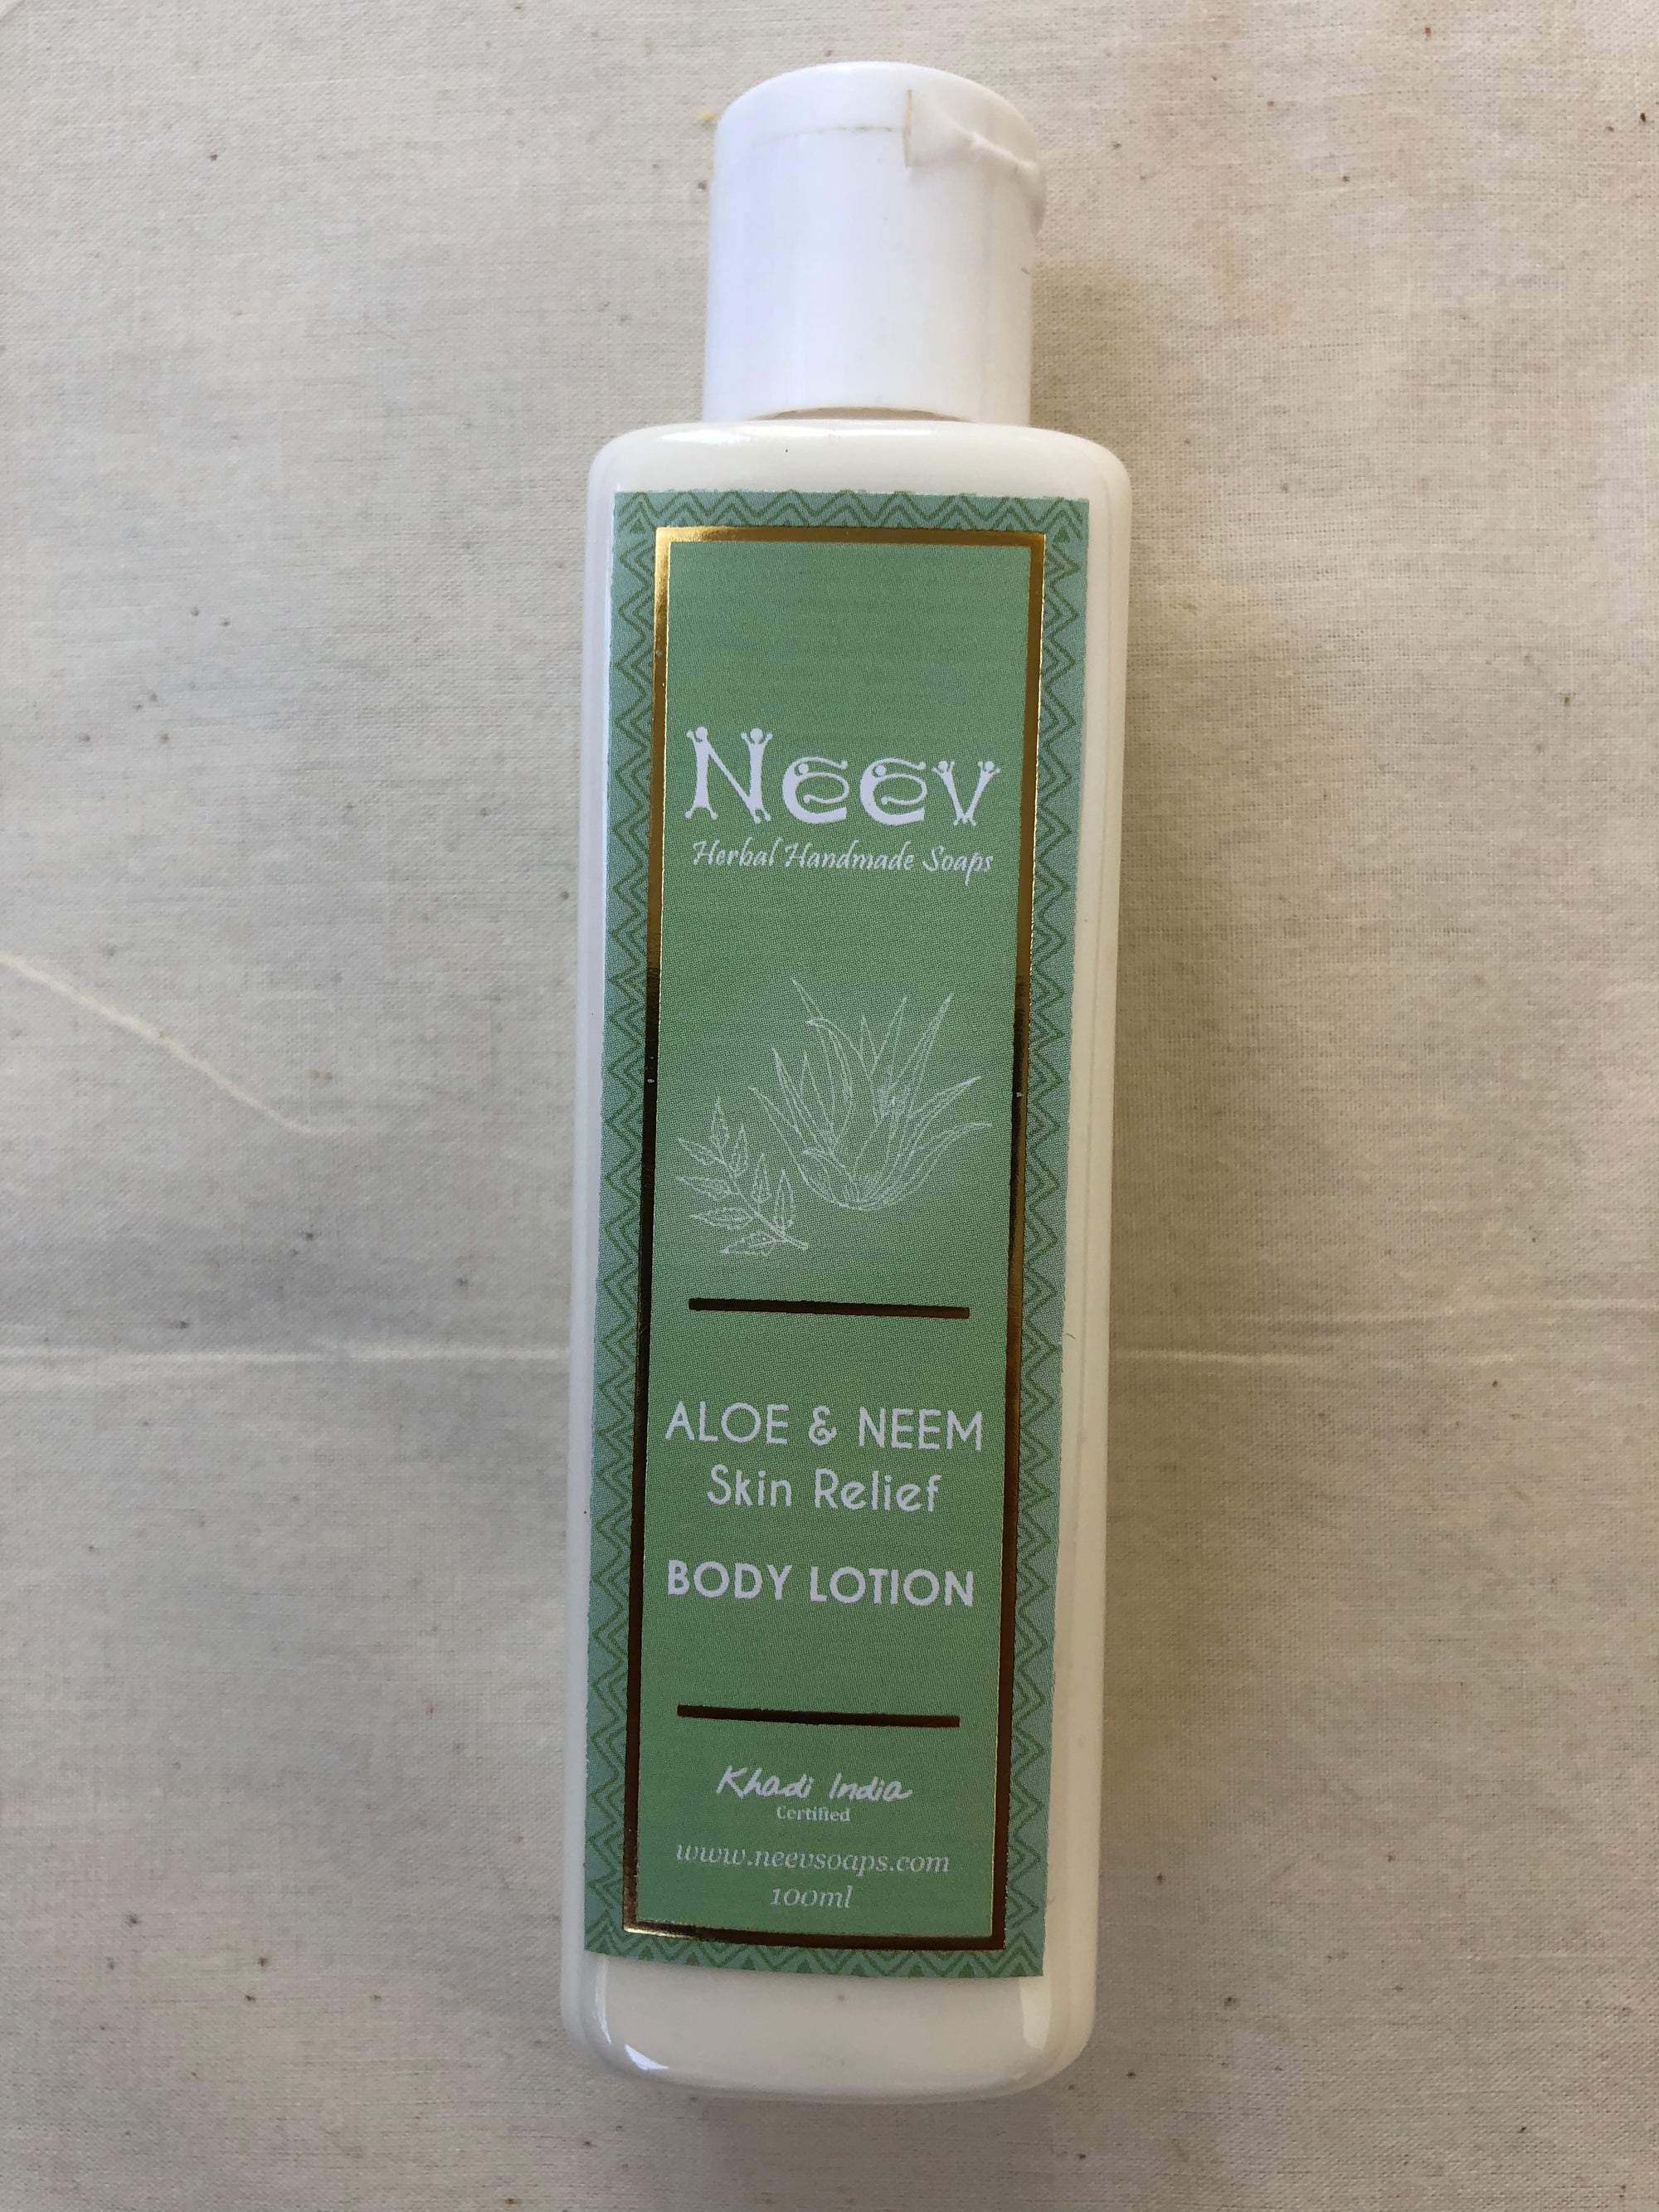 Aloe and Neem Skin Relief Body Lotion By Neev